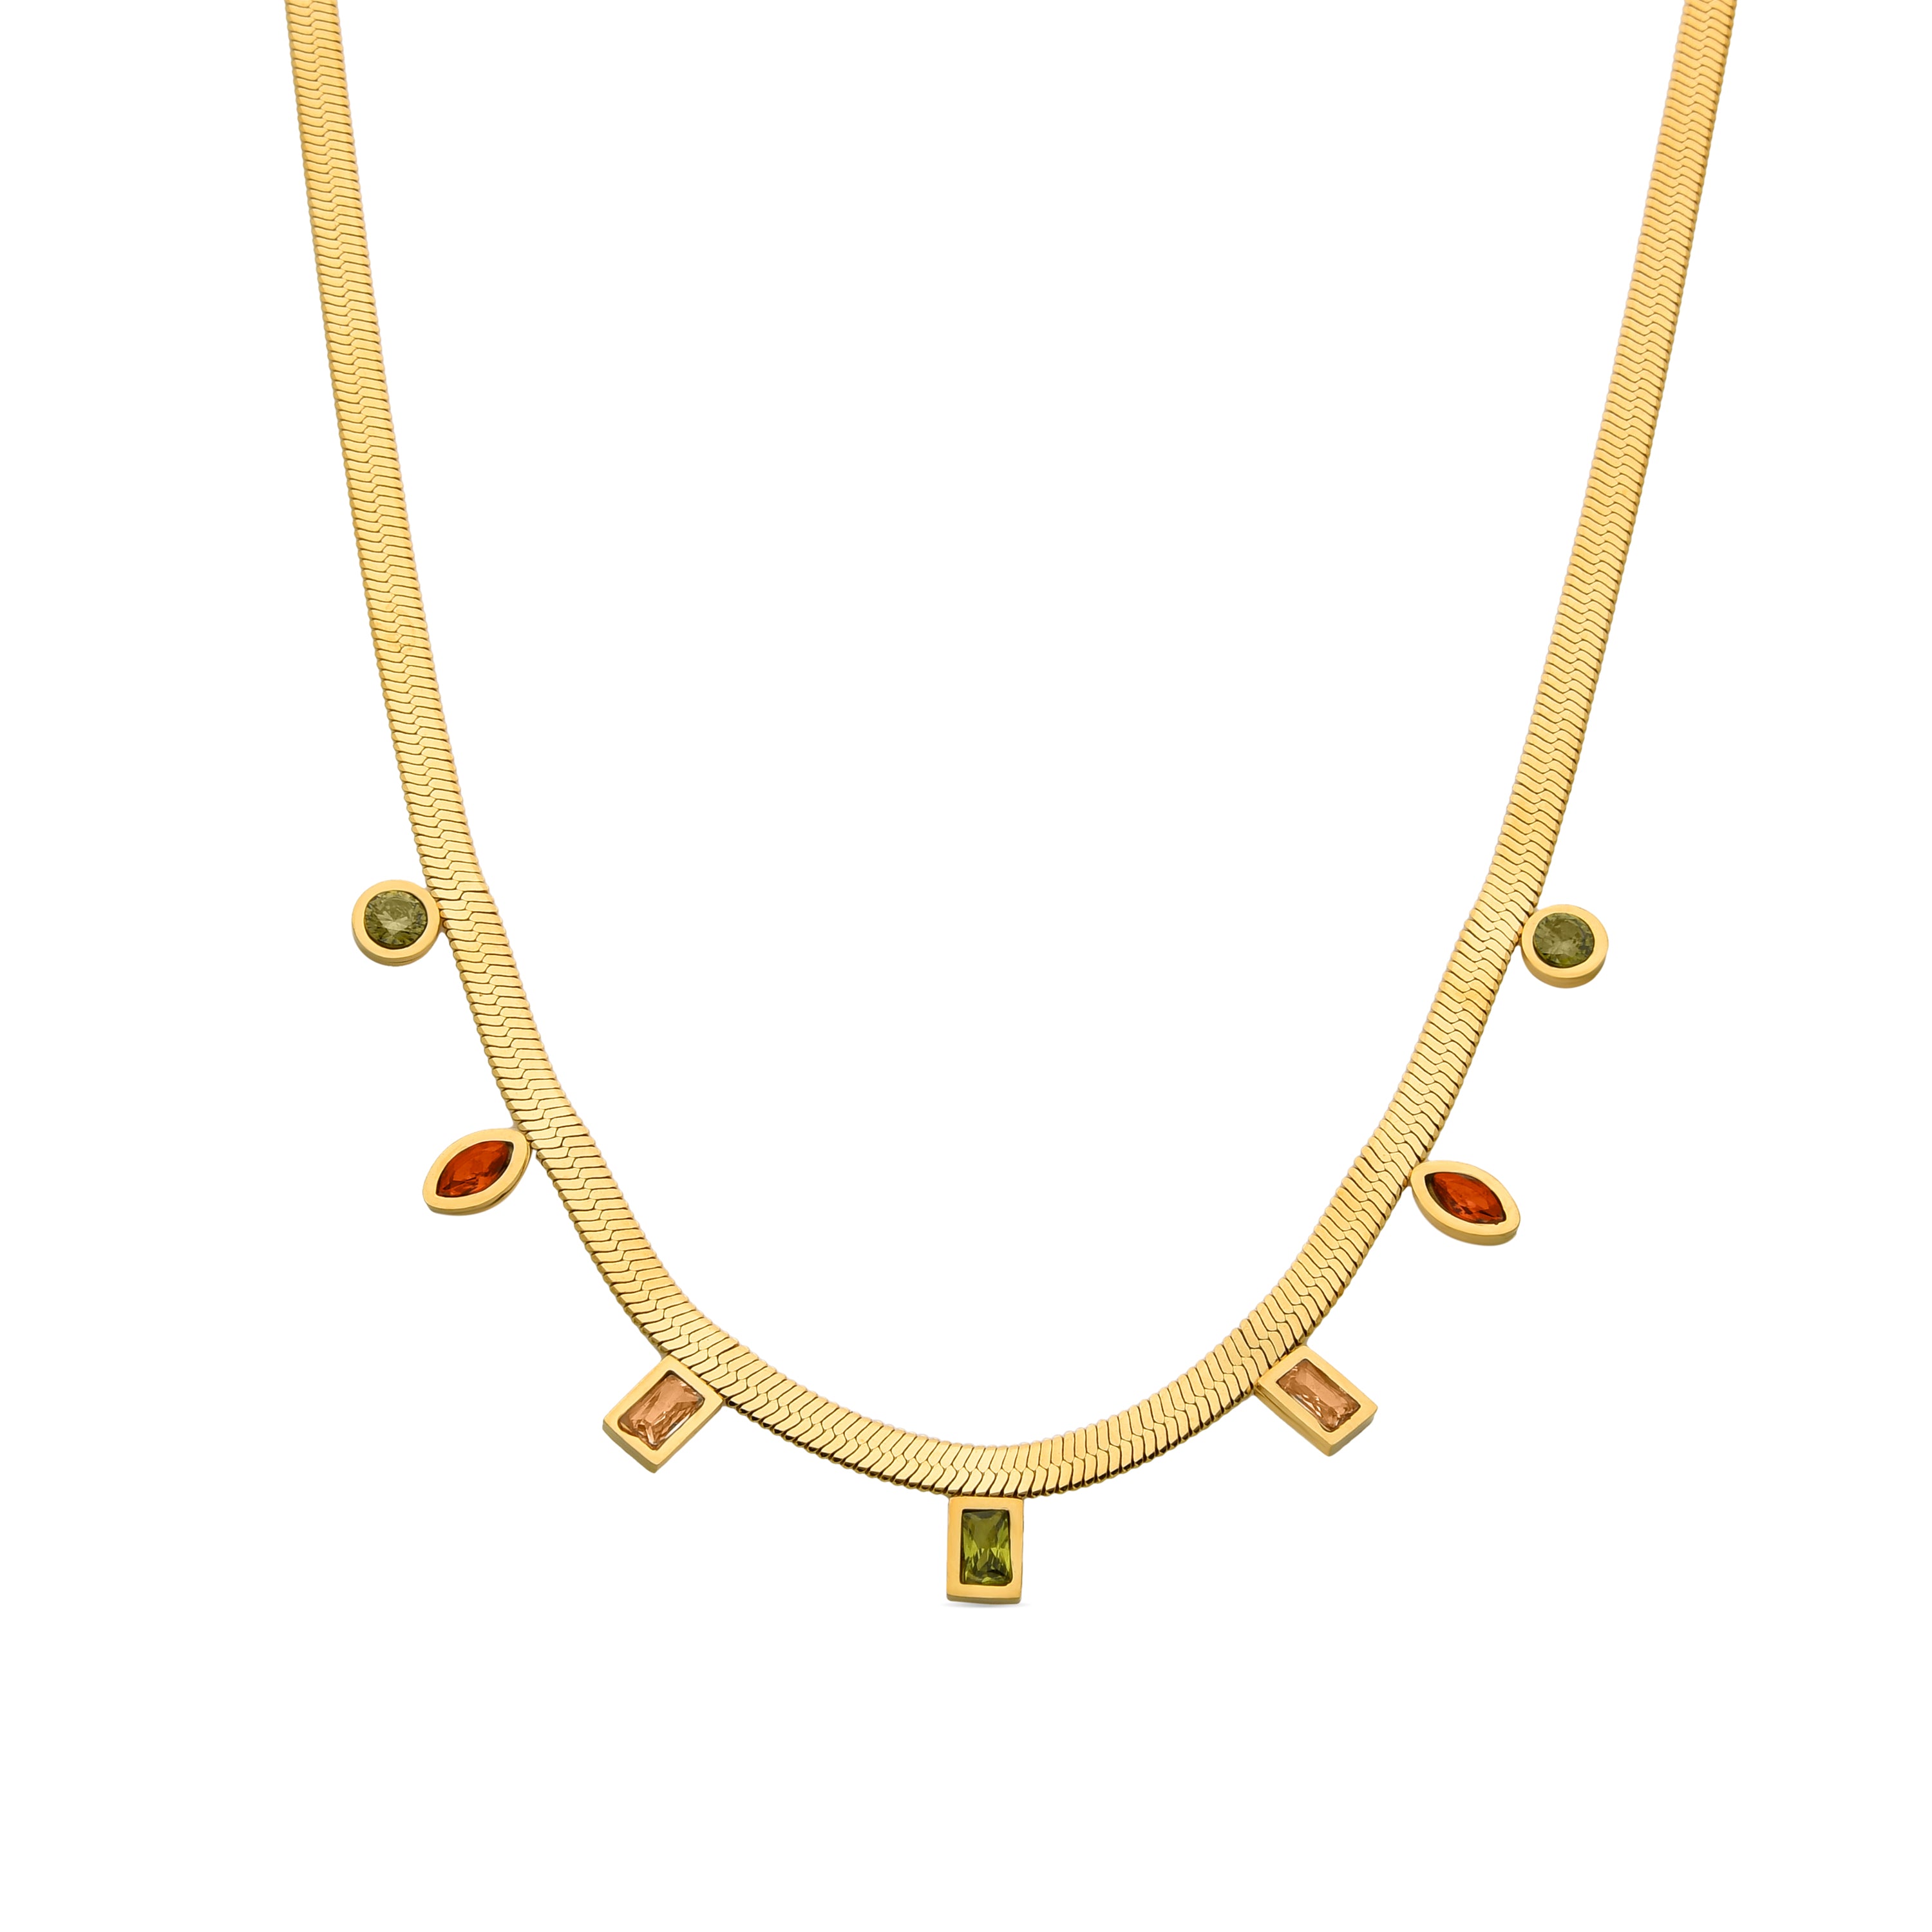 Phieo necklace 18k gold finish